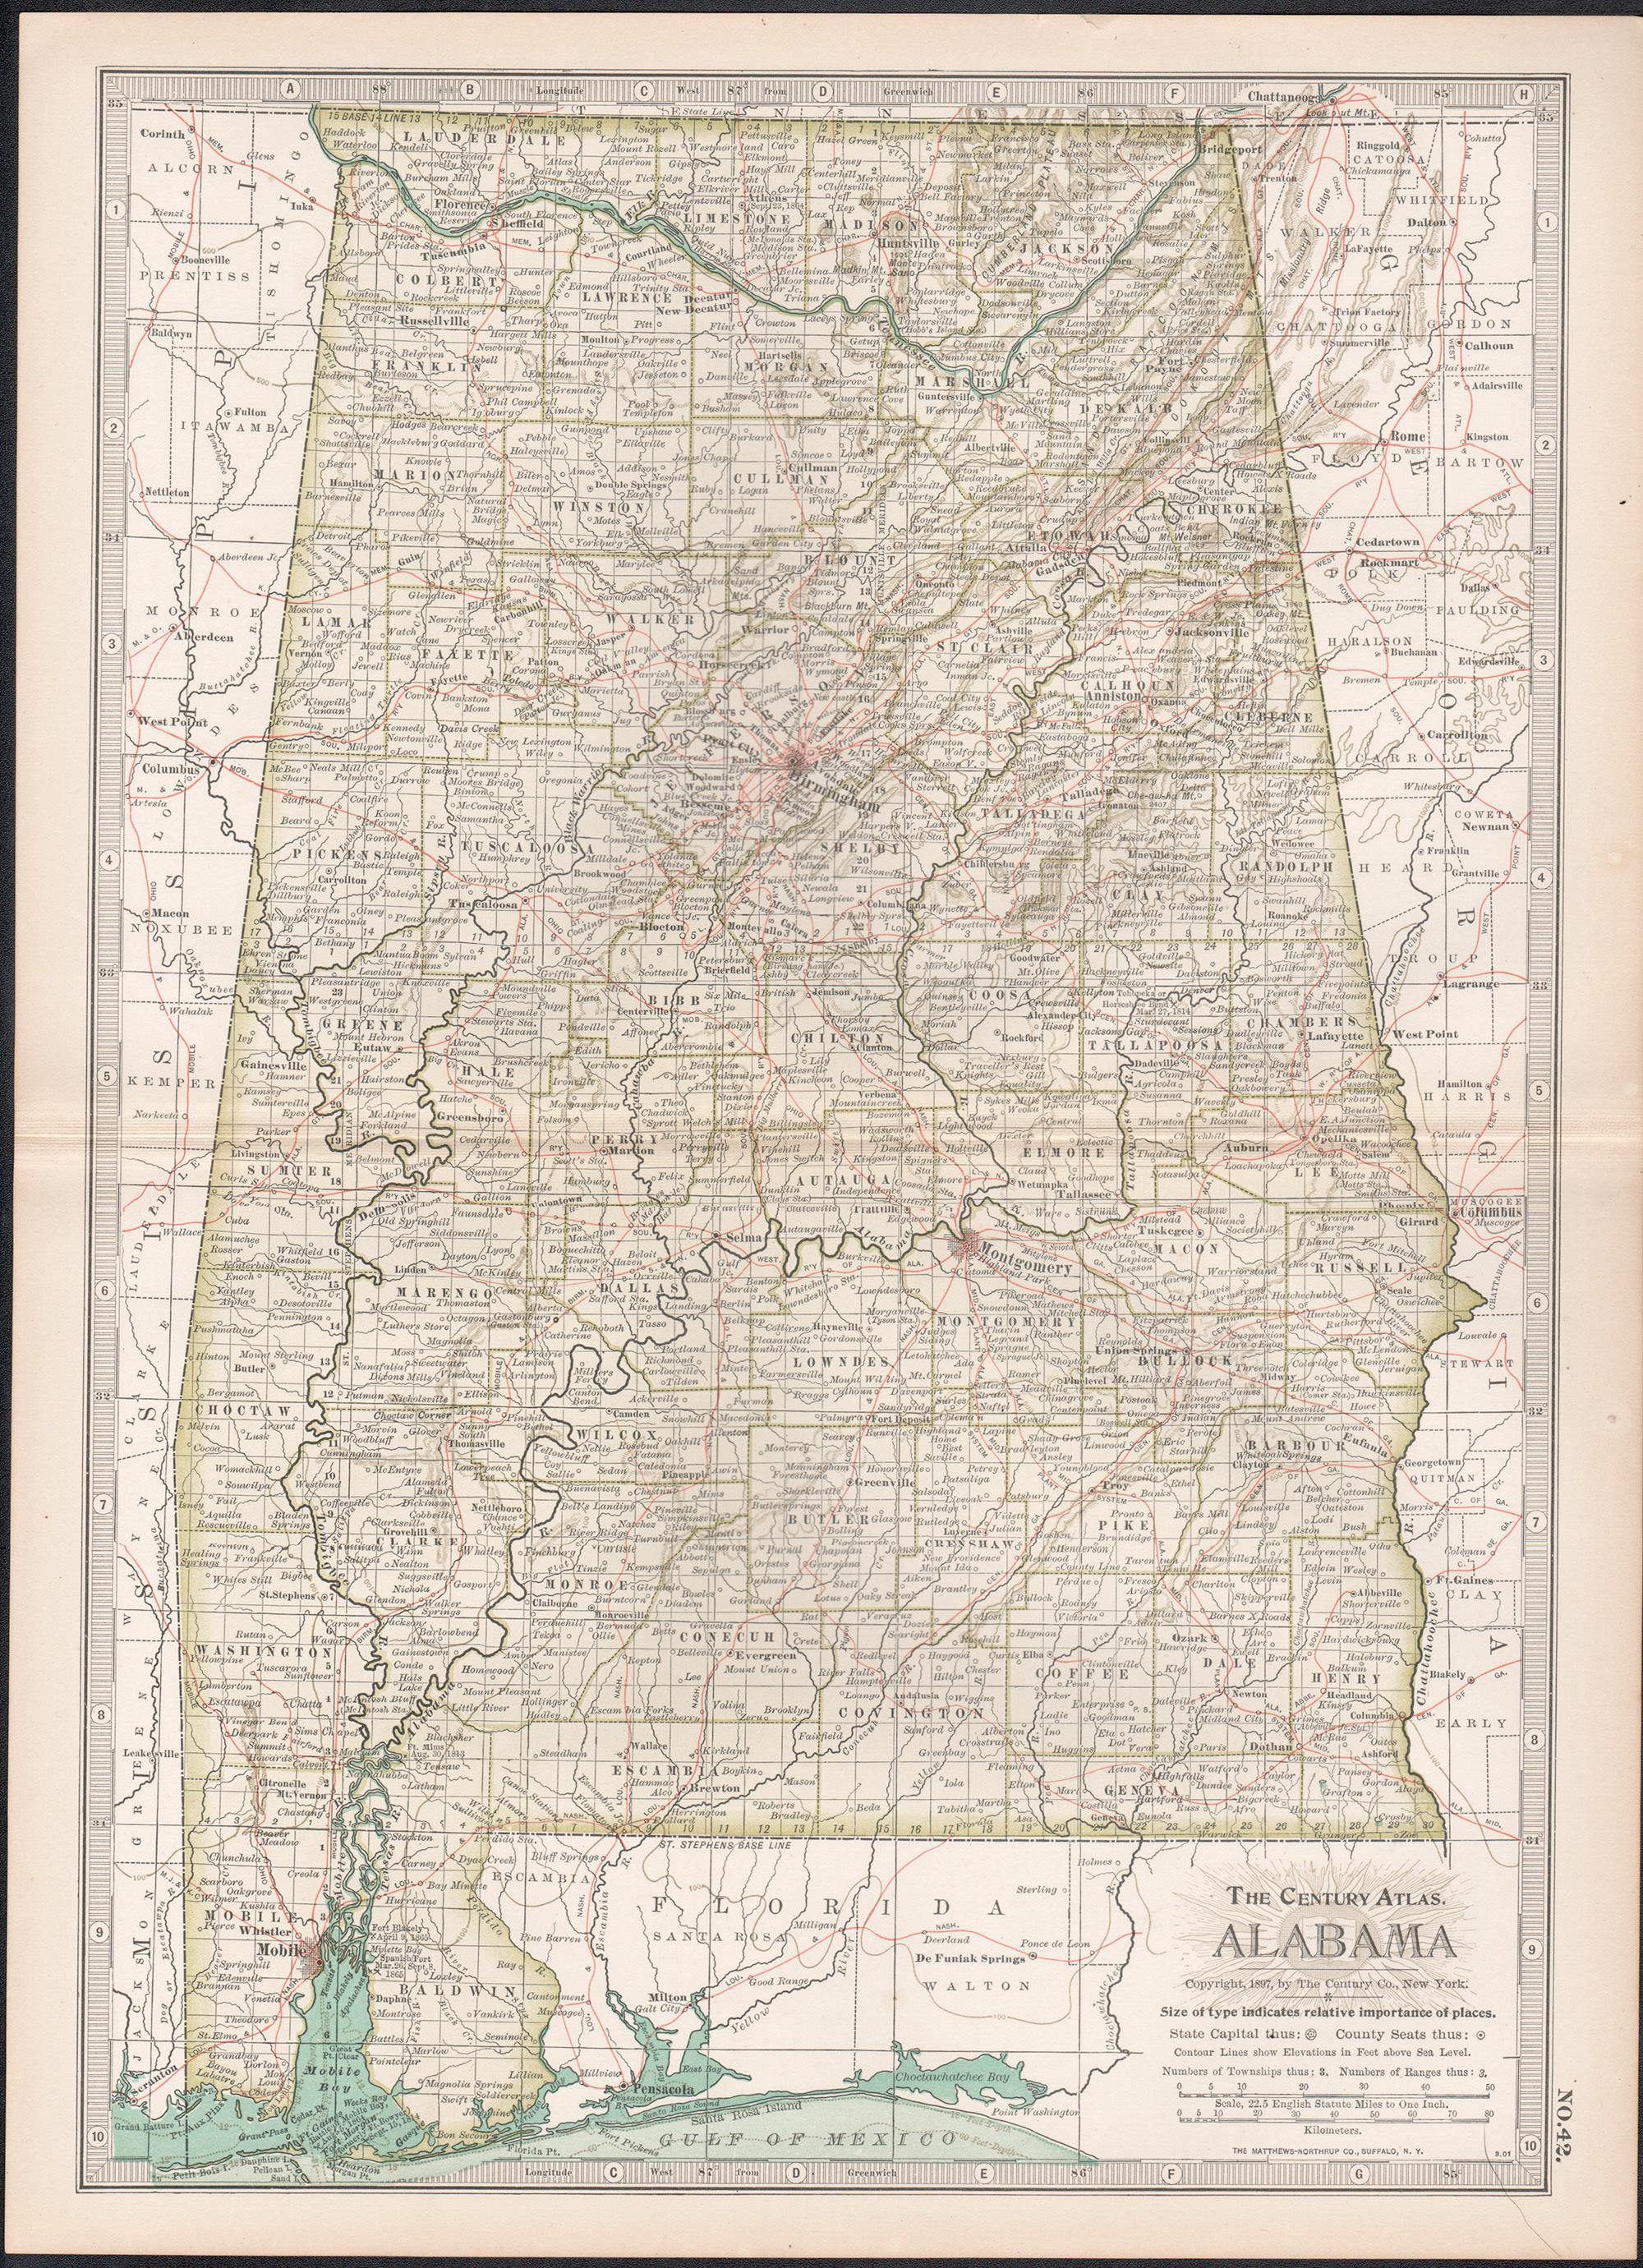 Alabama. USA Century Atlas state antique vintage map - Print by Unknown